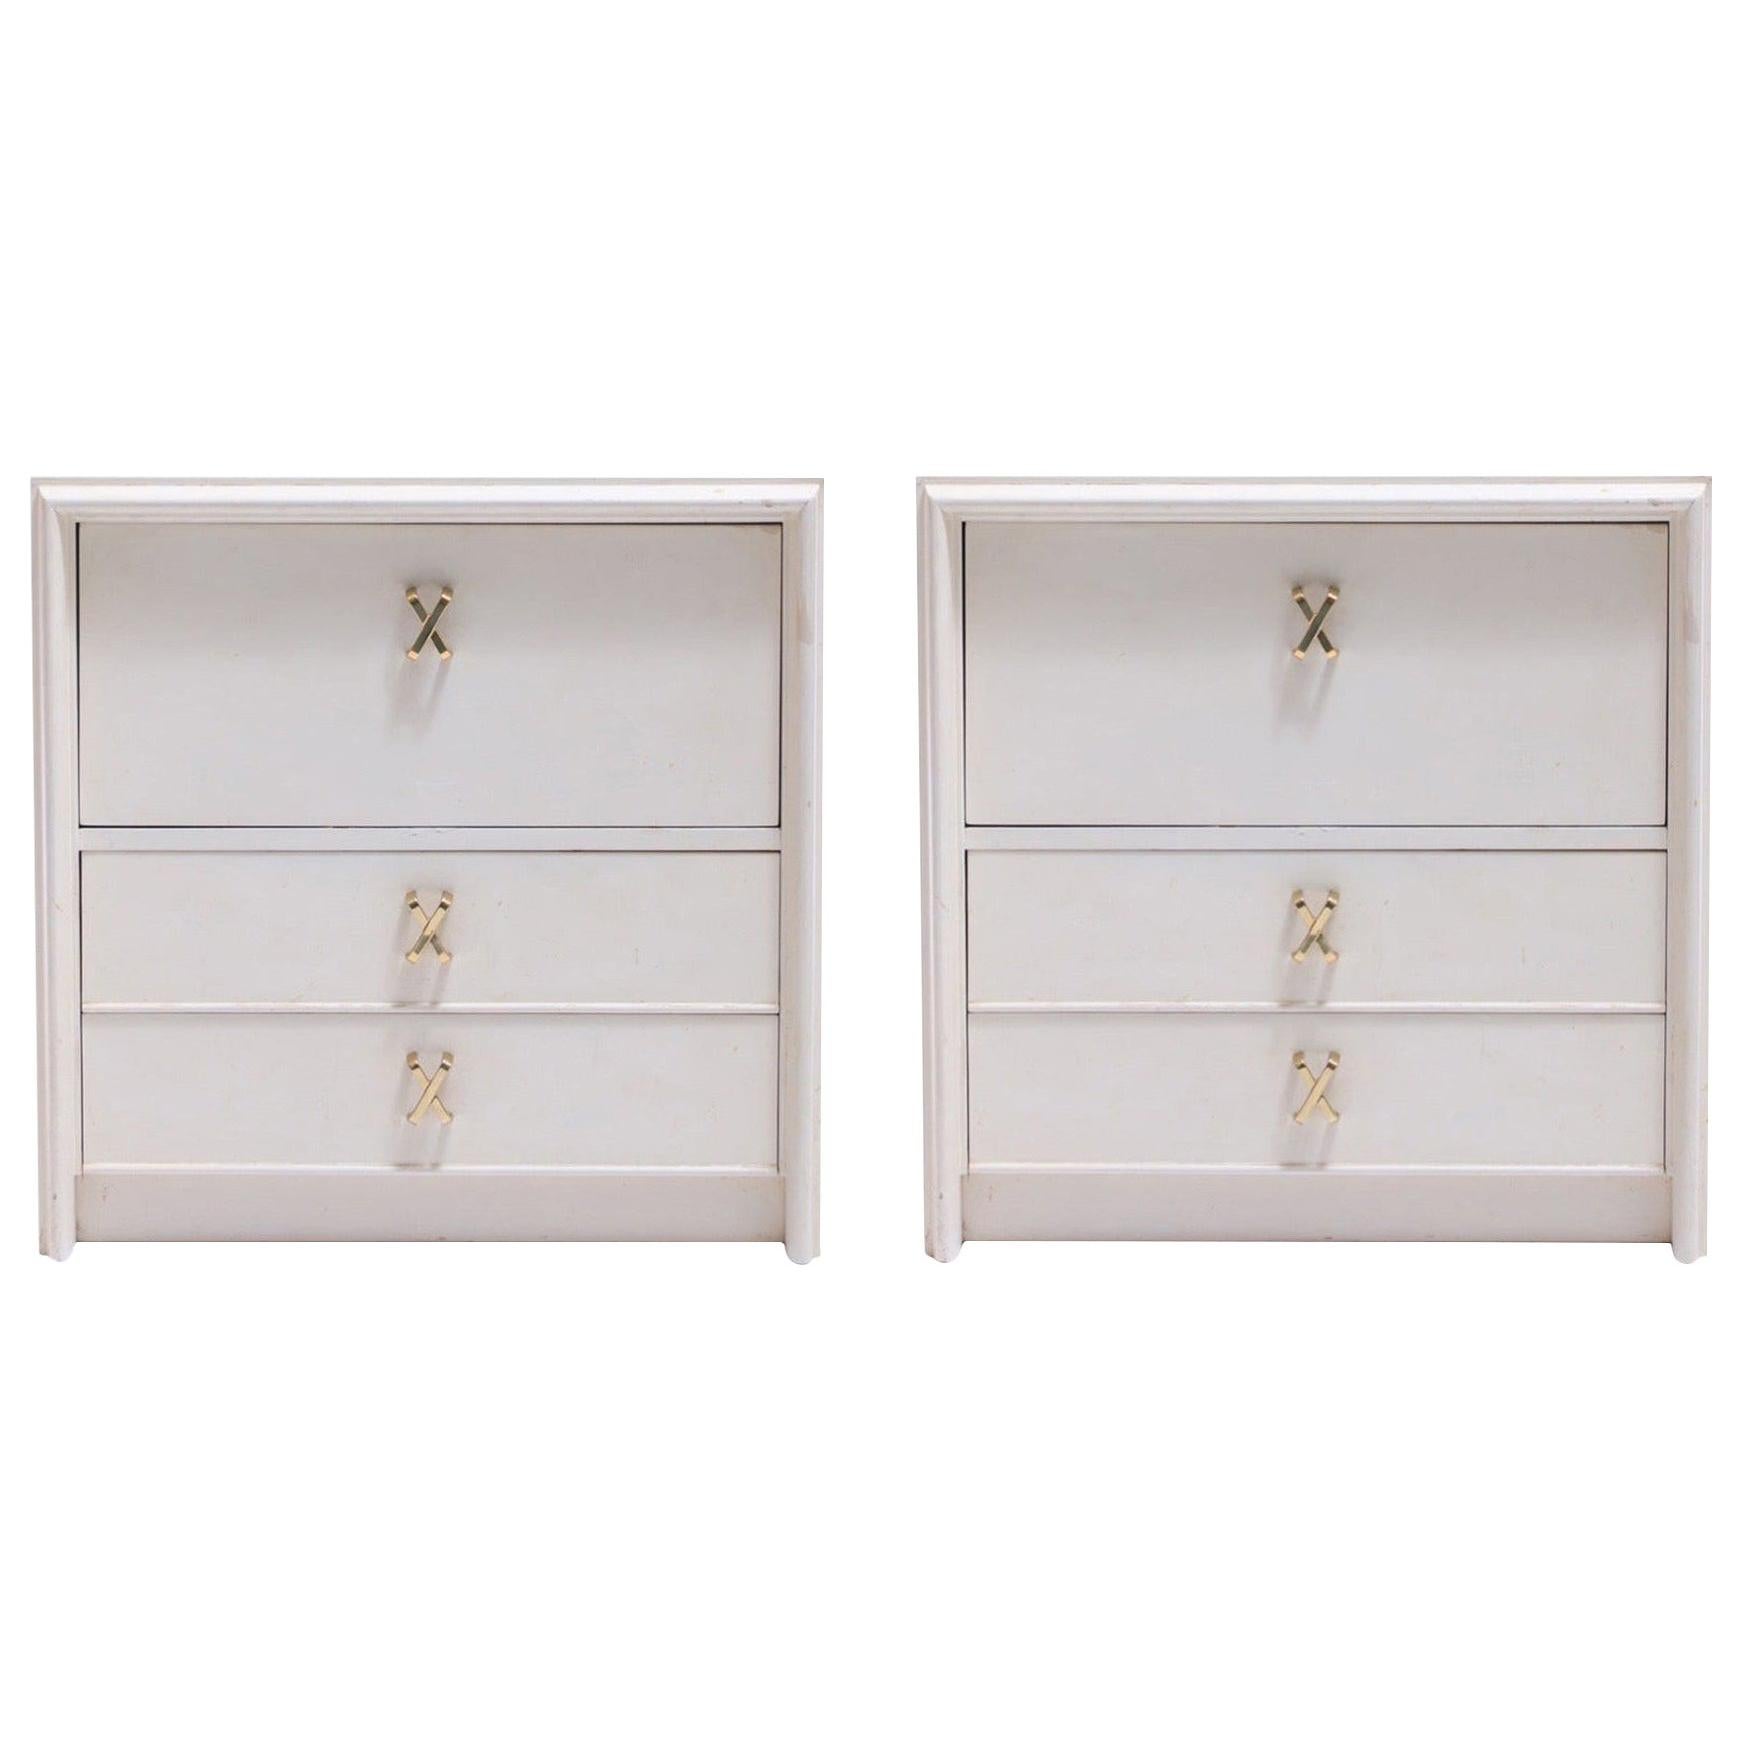 Pair of Paul Frankl Ivory Lacquered Nightstands with Brass X Pulls, circa 1950